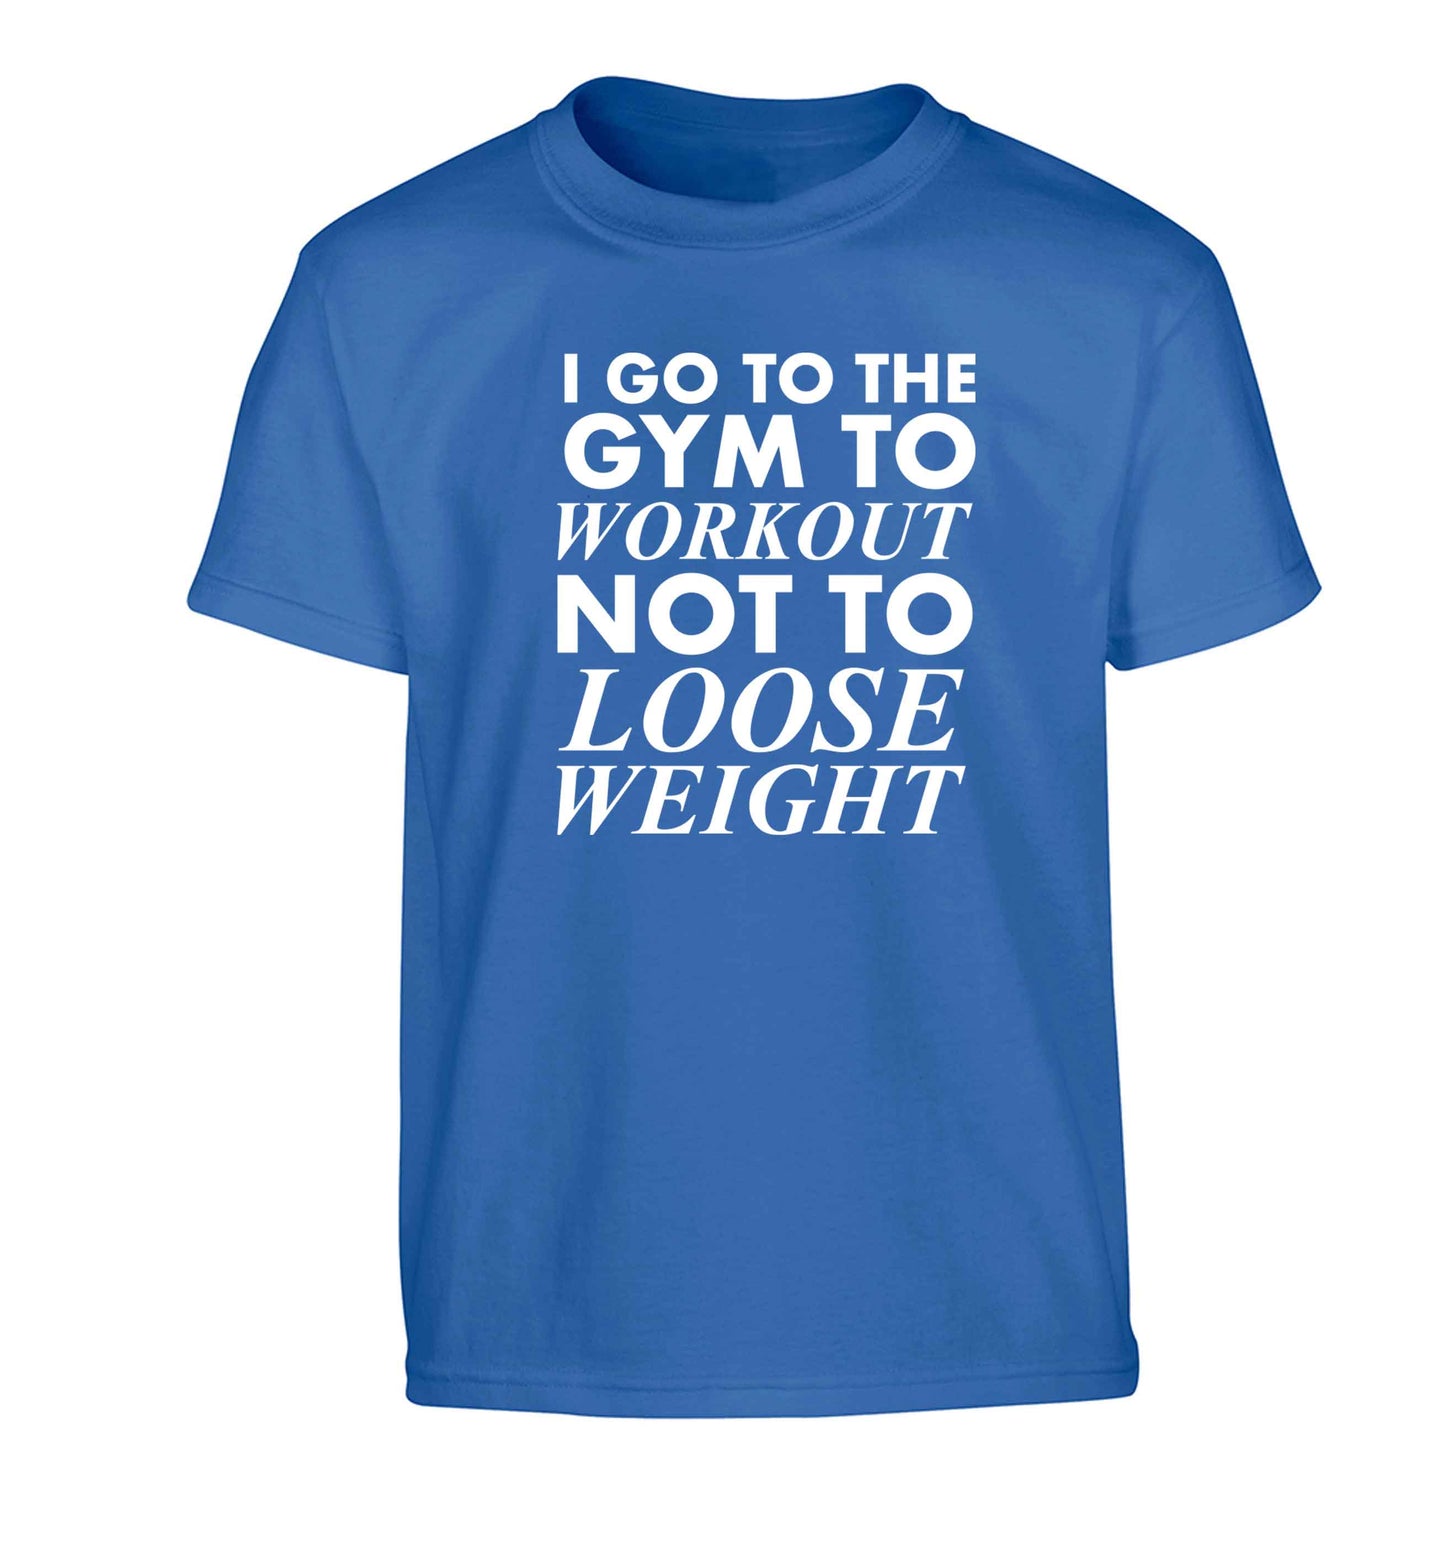 I go to the gym to workout not to loose weight Children's blue Tshirt 12-13 Years